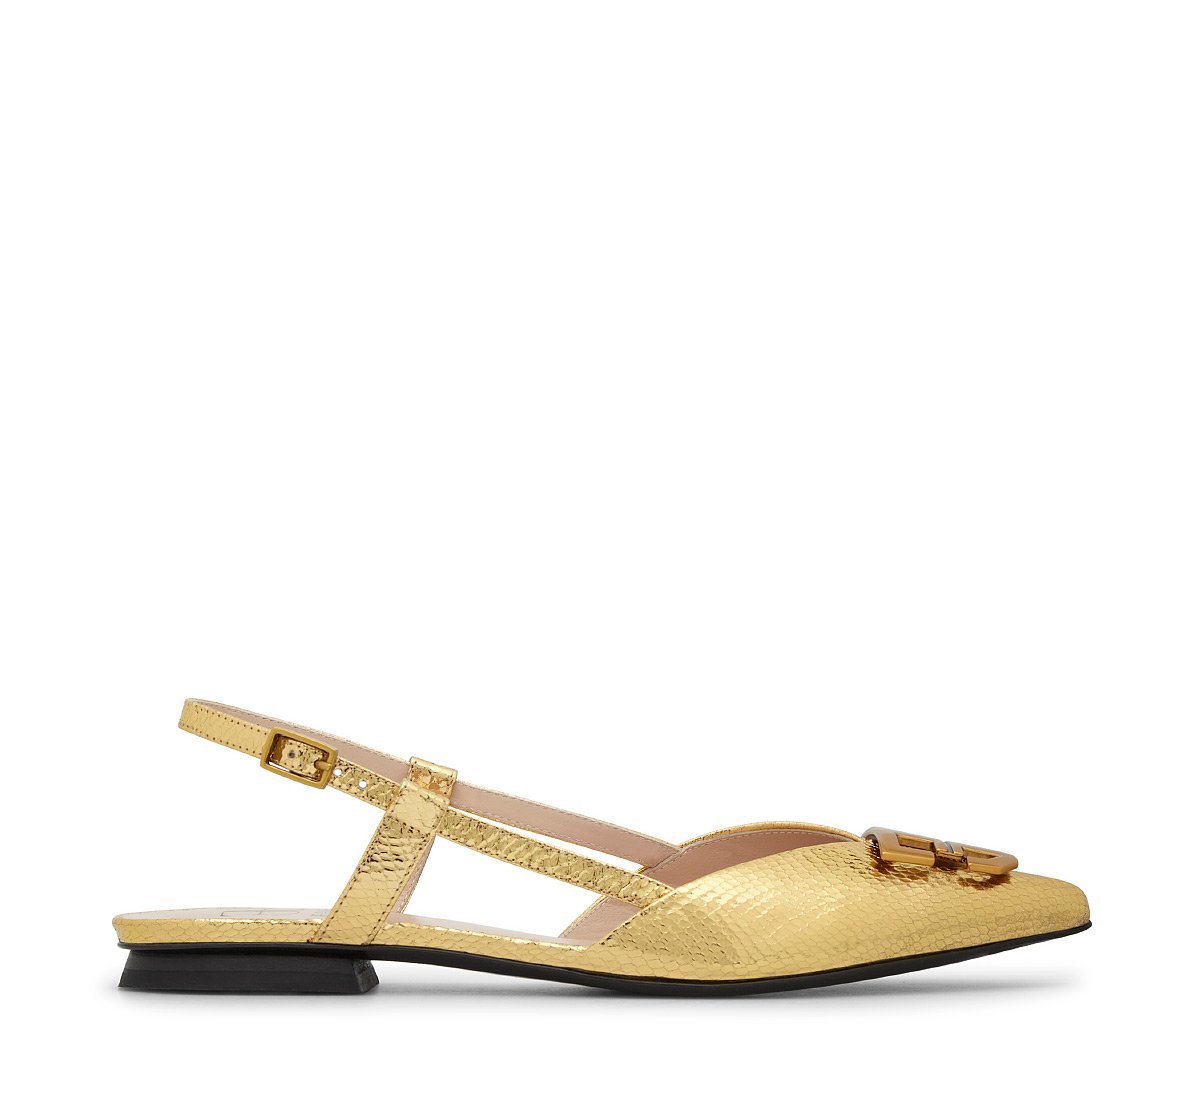 Slingback in soft nappa leather.